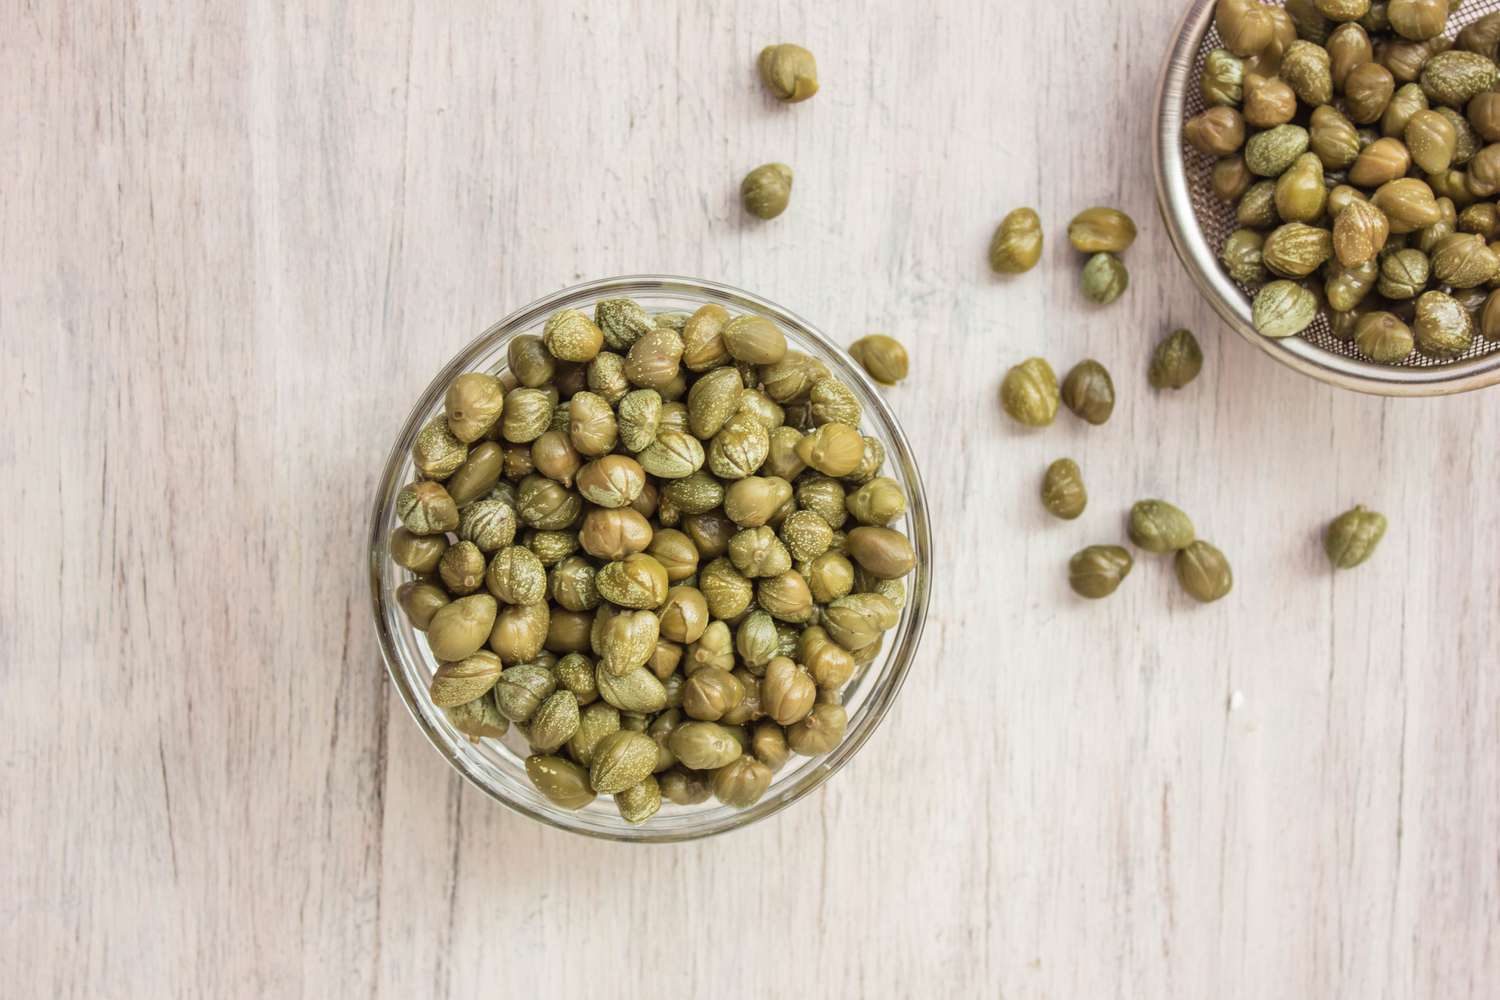 The Ultimate Guide To Substituting Capers In Your Dish